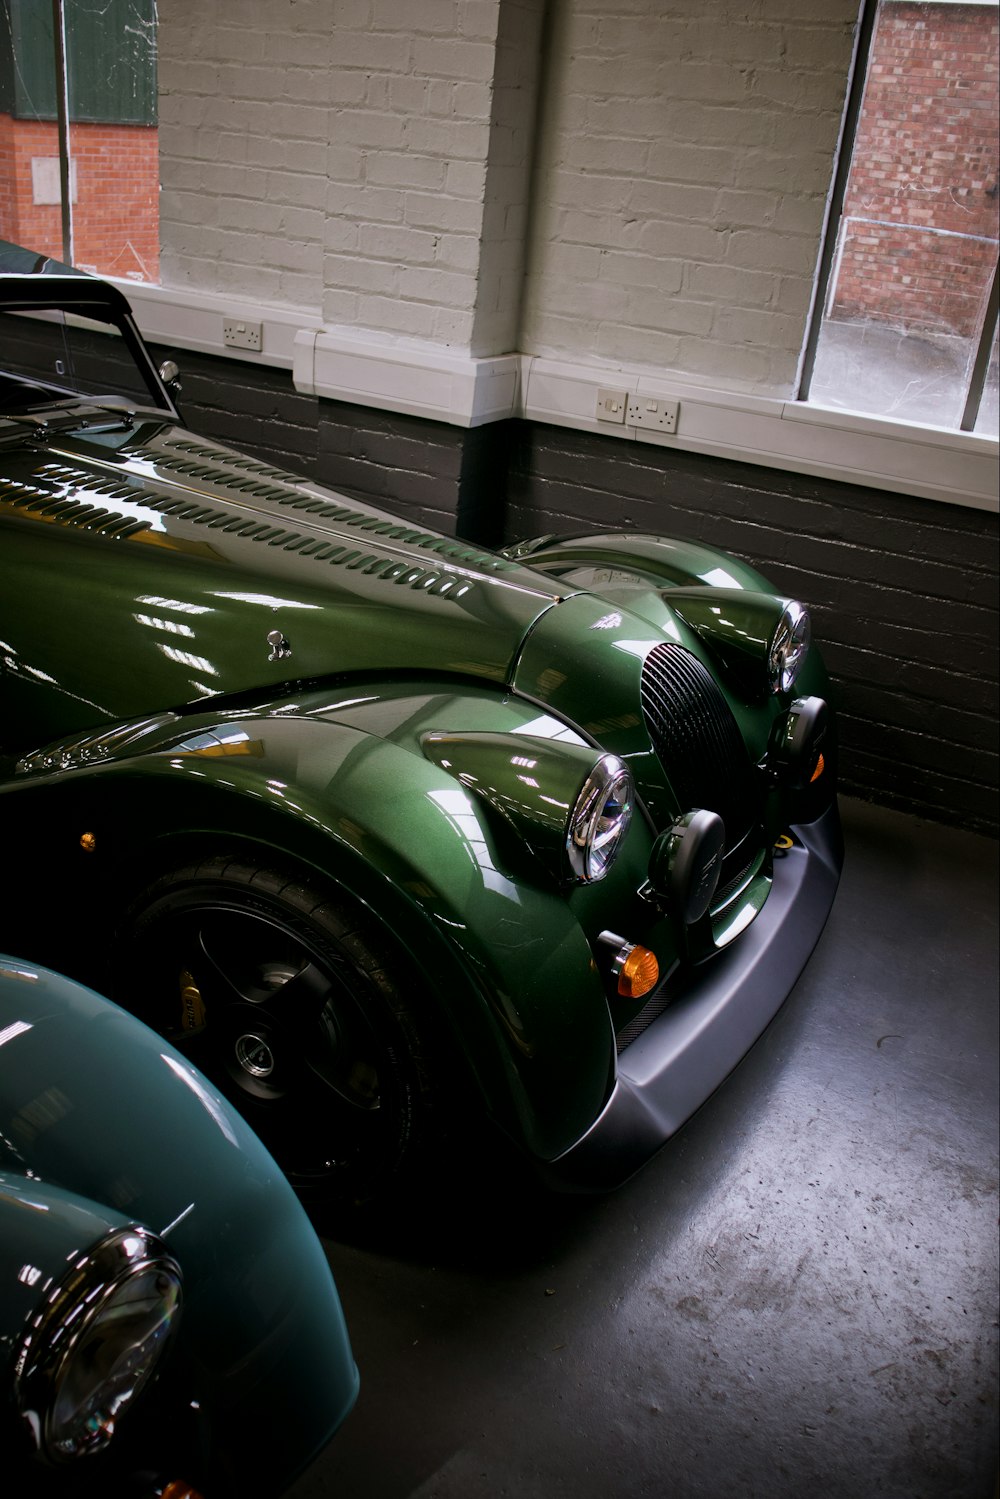 a green car parked in a garage next to another car